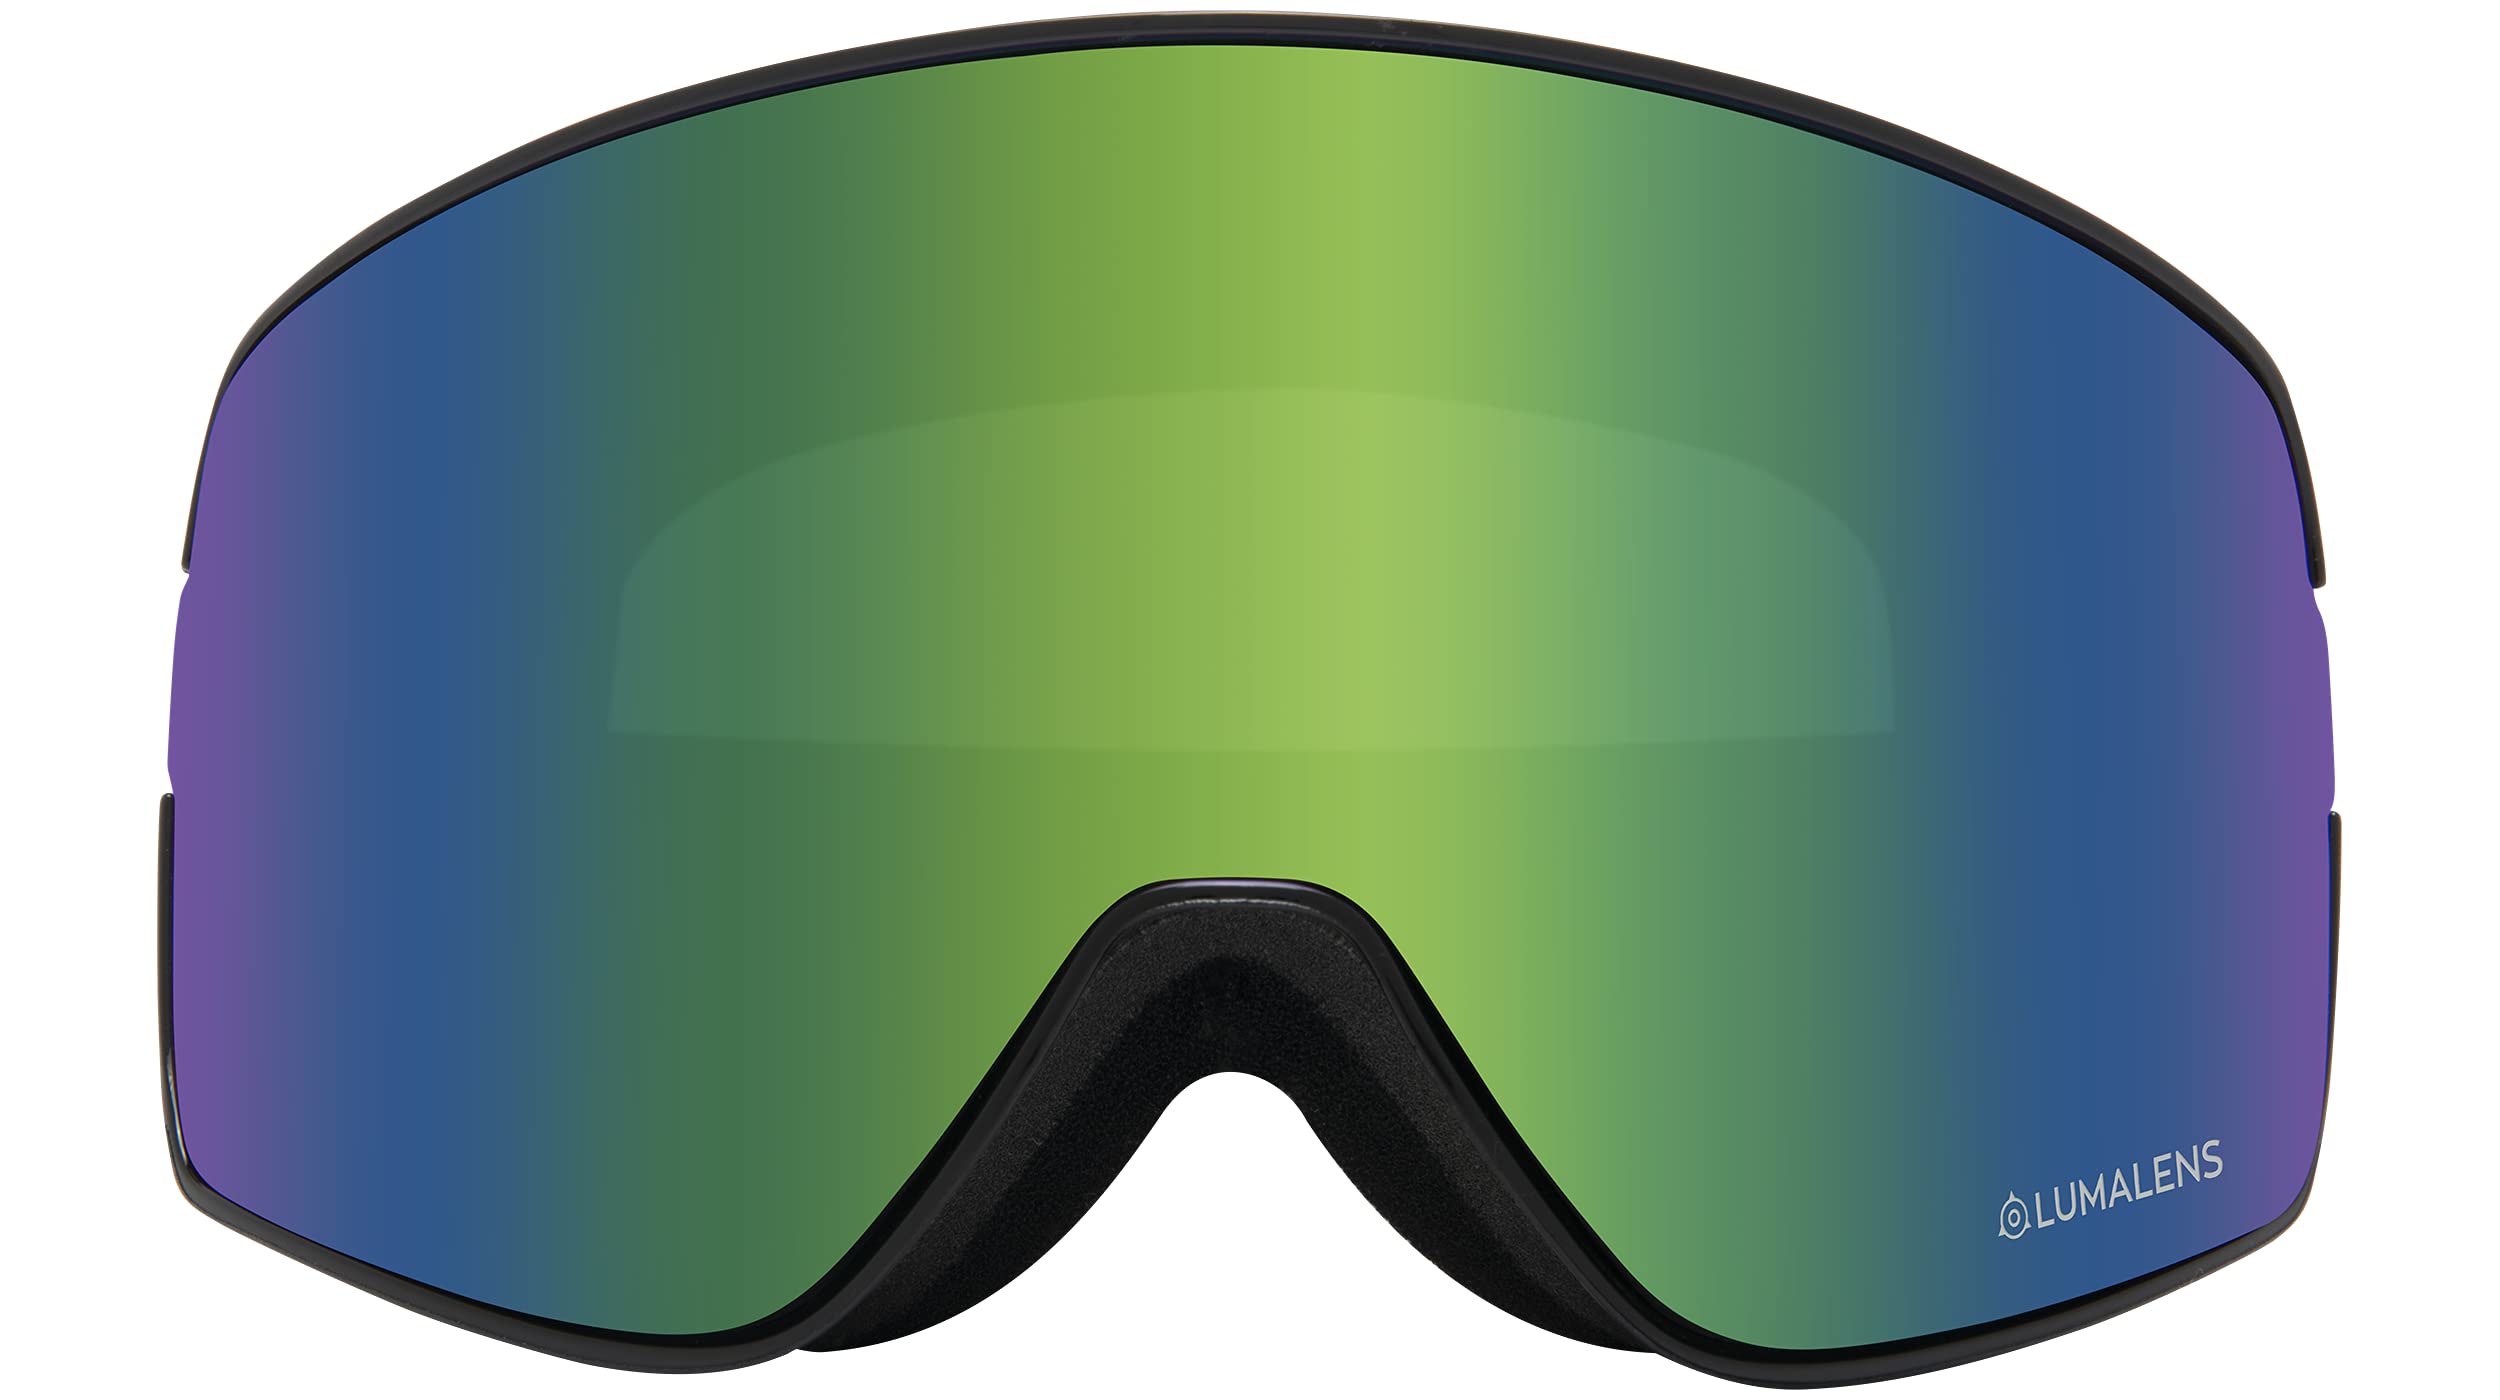 Dragon Male Snowgoggles NFX2 with Bonus Lens - Split with Lumalens Green Ion + Lumalens Amber